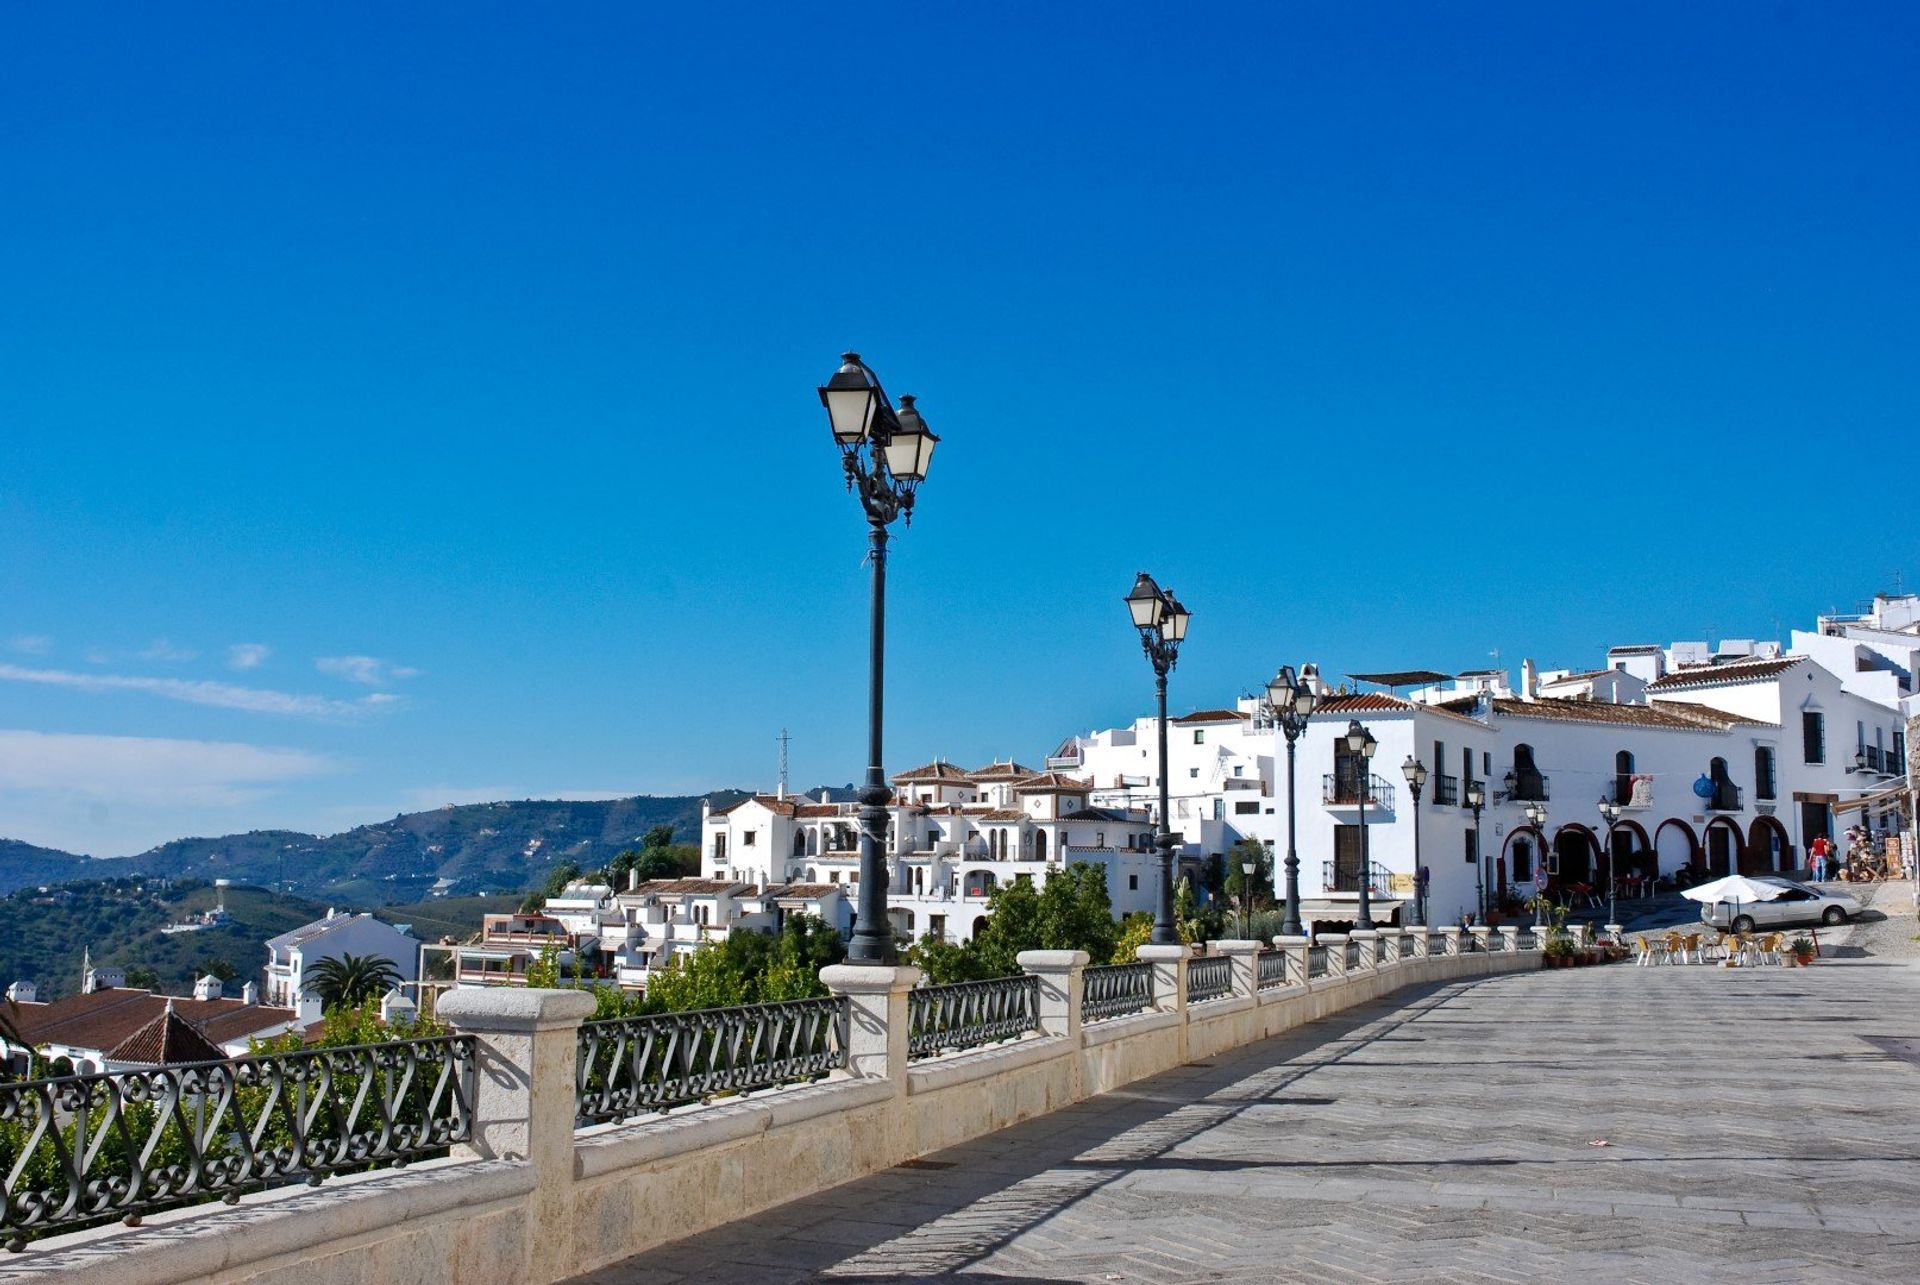 Take an evening stroll down the promenade with a beautiful backdrop of Sierras de Tejeda, Almijara and Alhama mountains